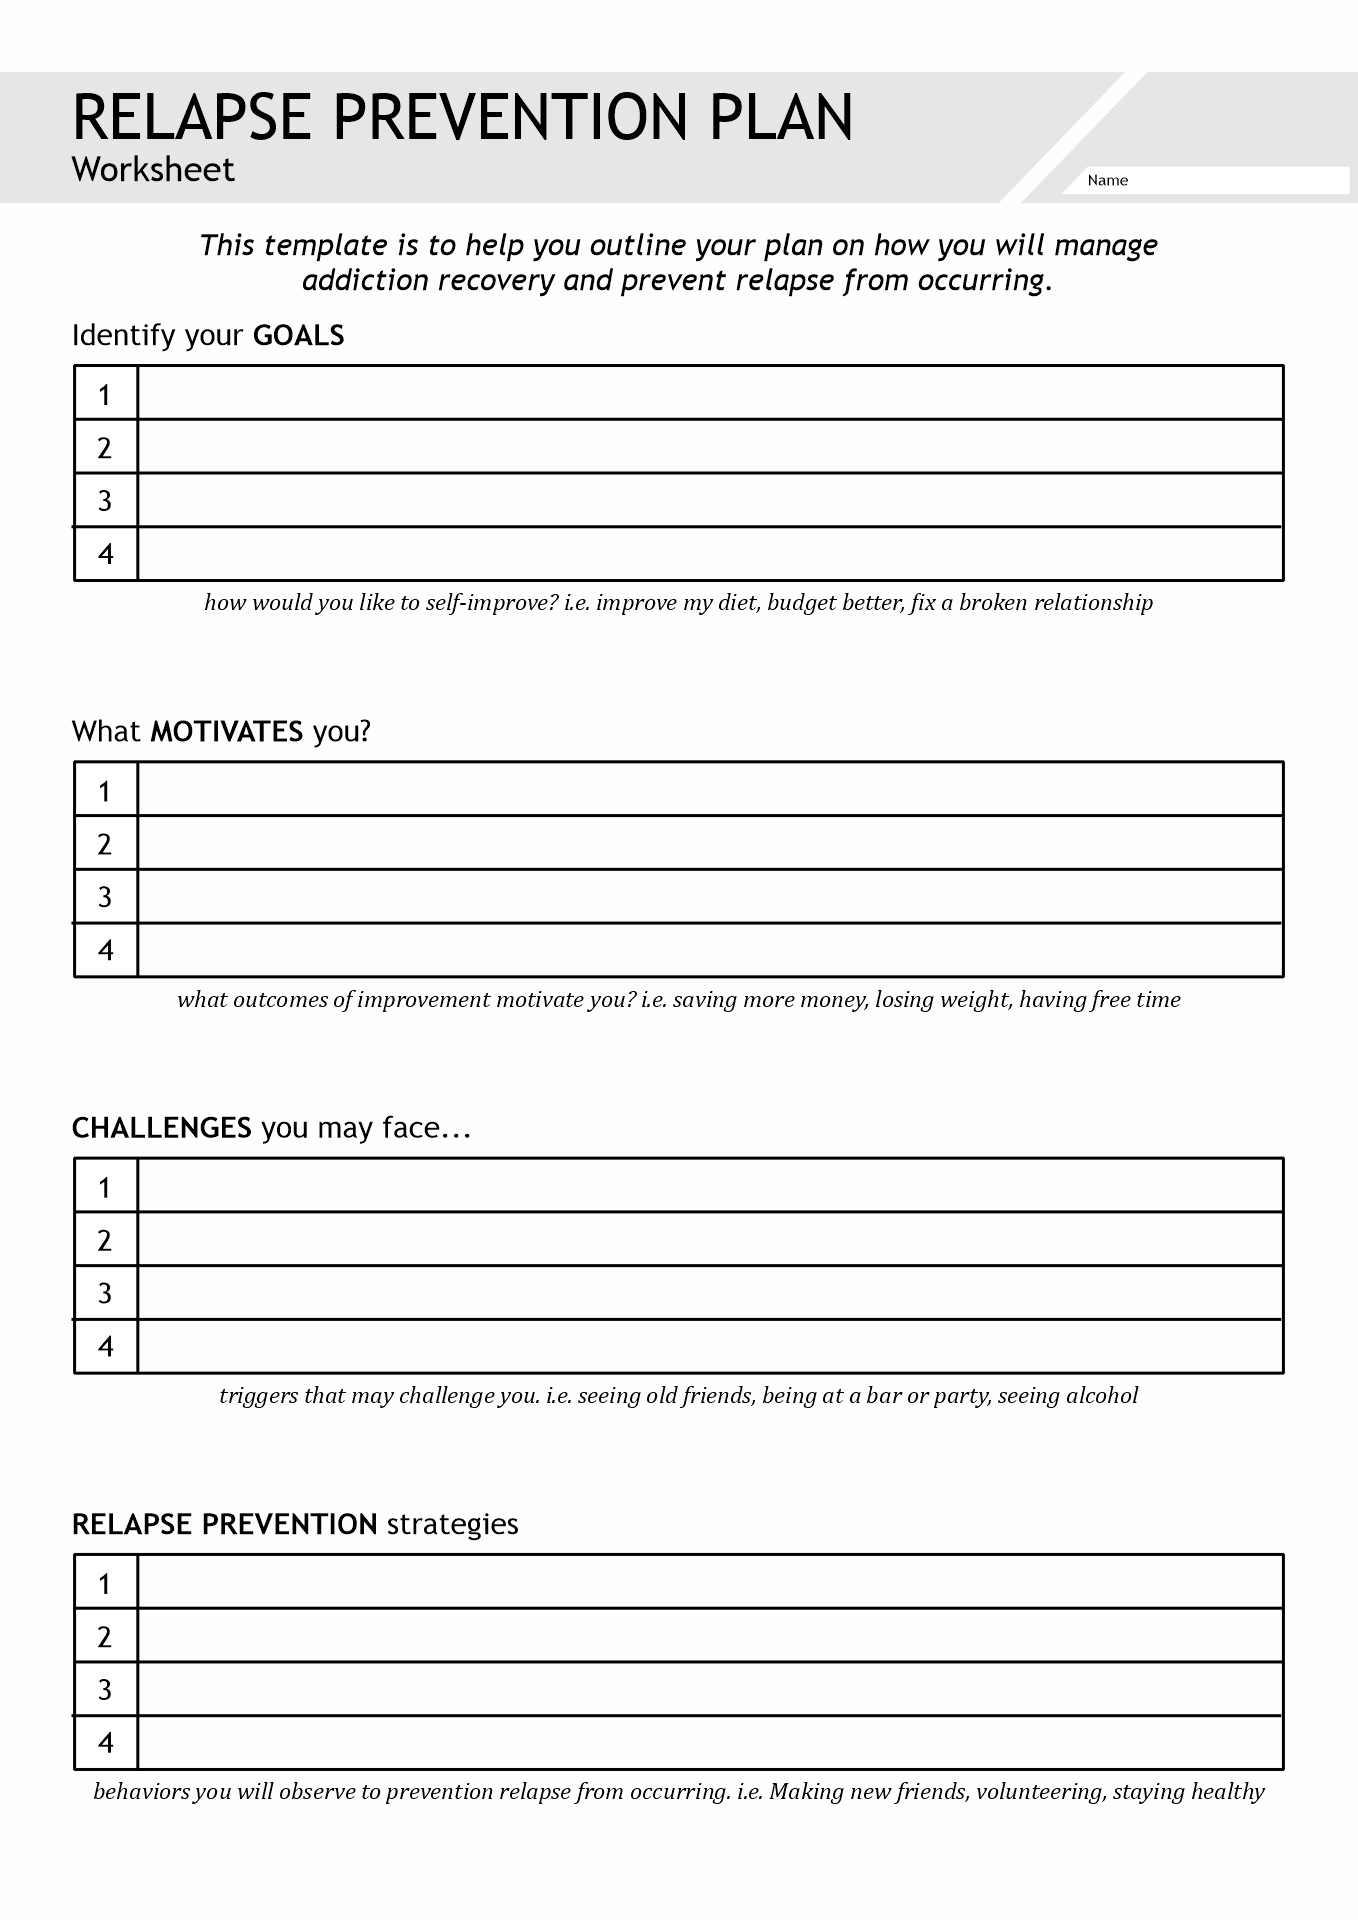 free-addiction-recovery-worksheets